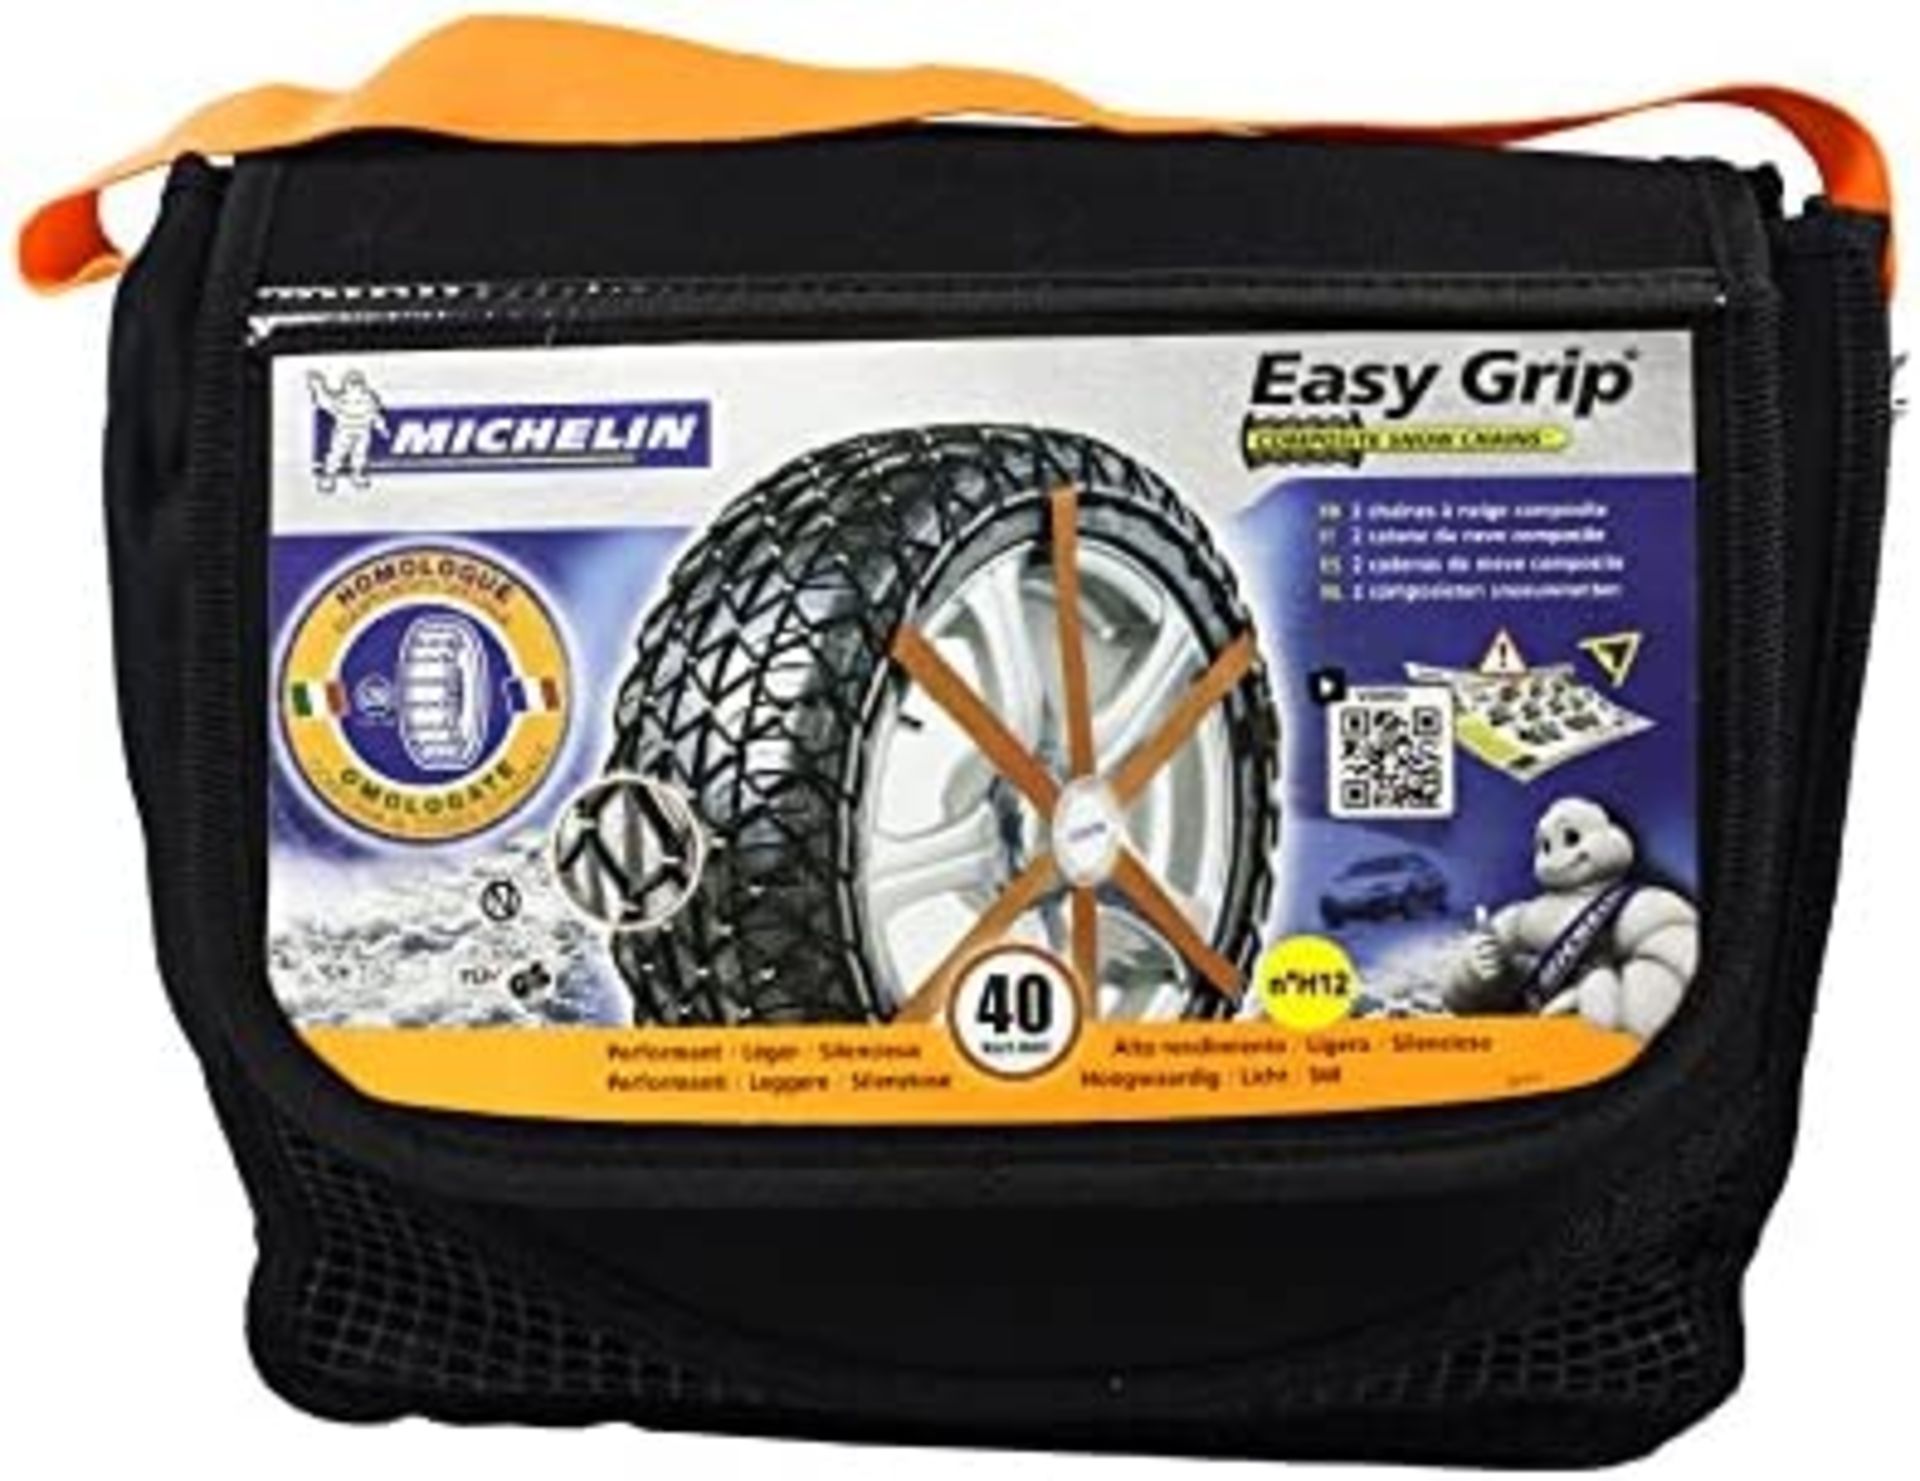 NEW PACKAGED SETS OF MICHELIN 7901 Easy Grip Snow Chains H12. RRP £82.95. Michelin 7901 Easy Grip